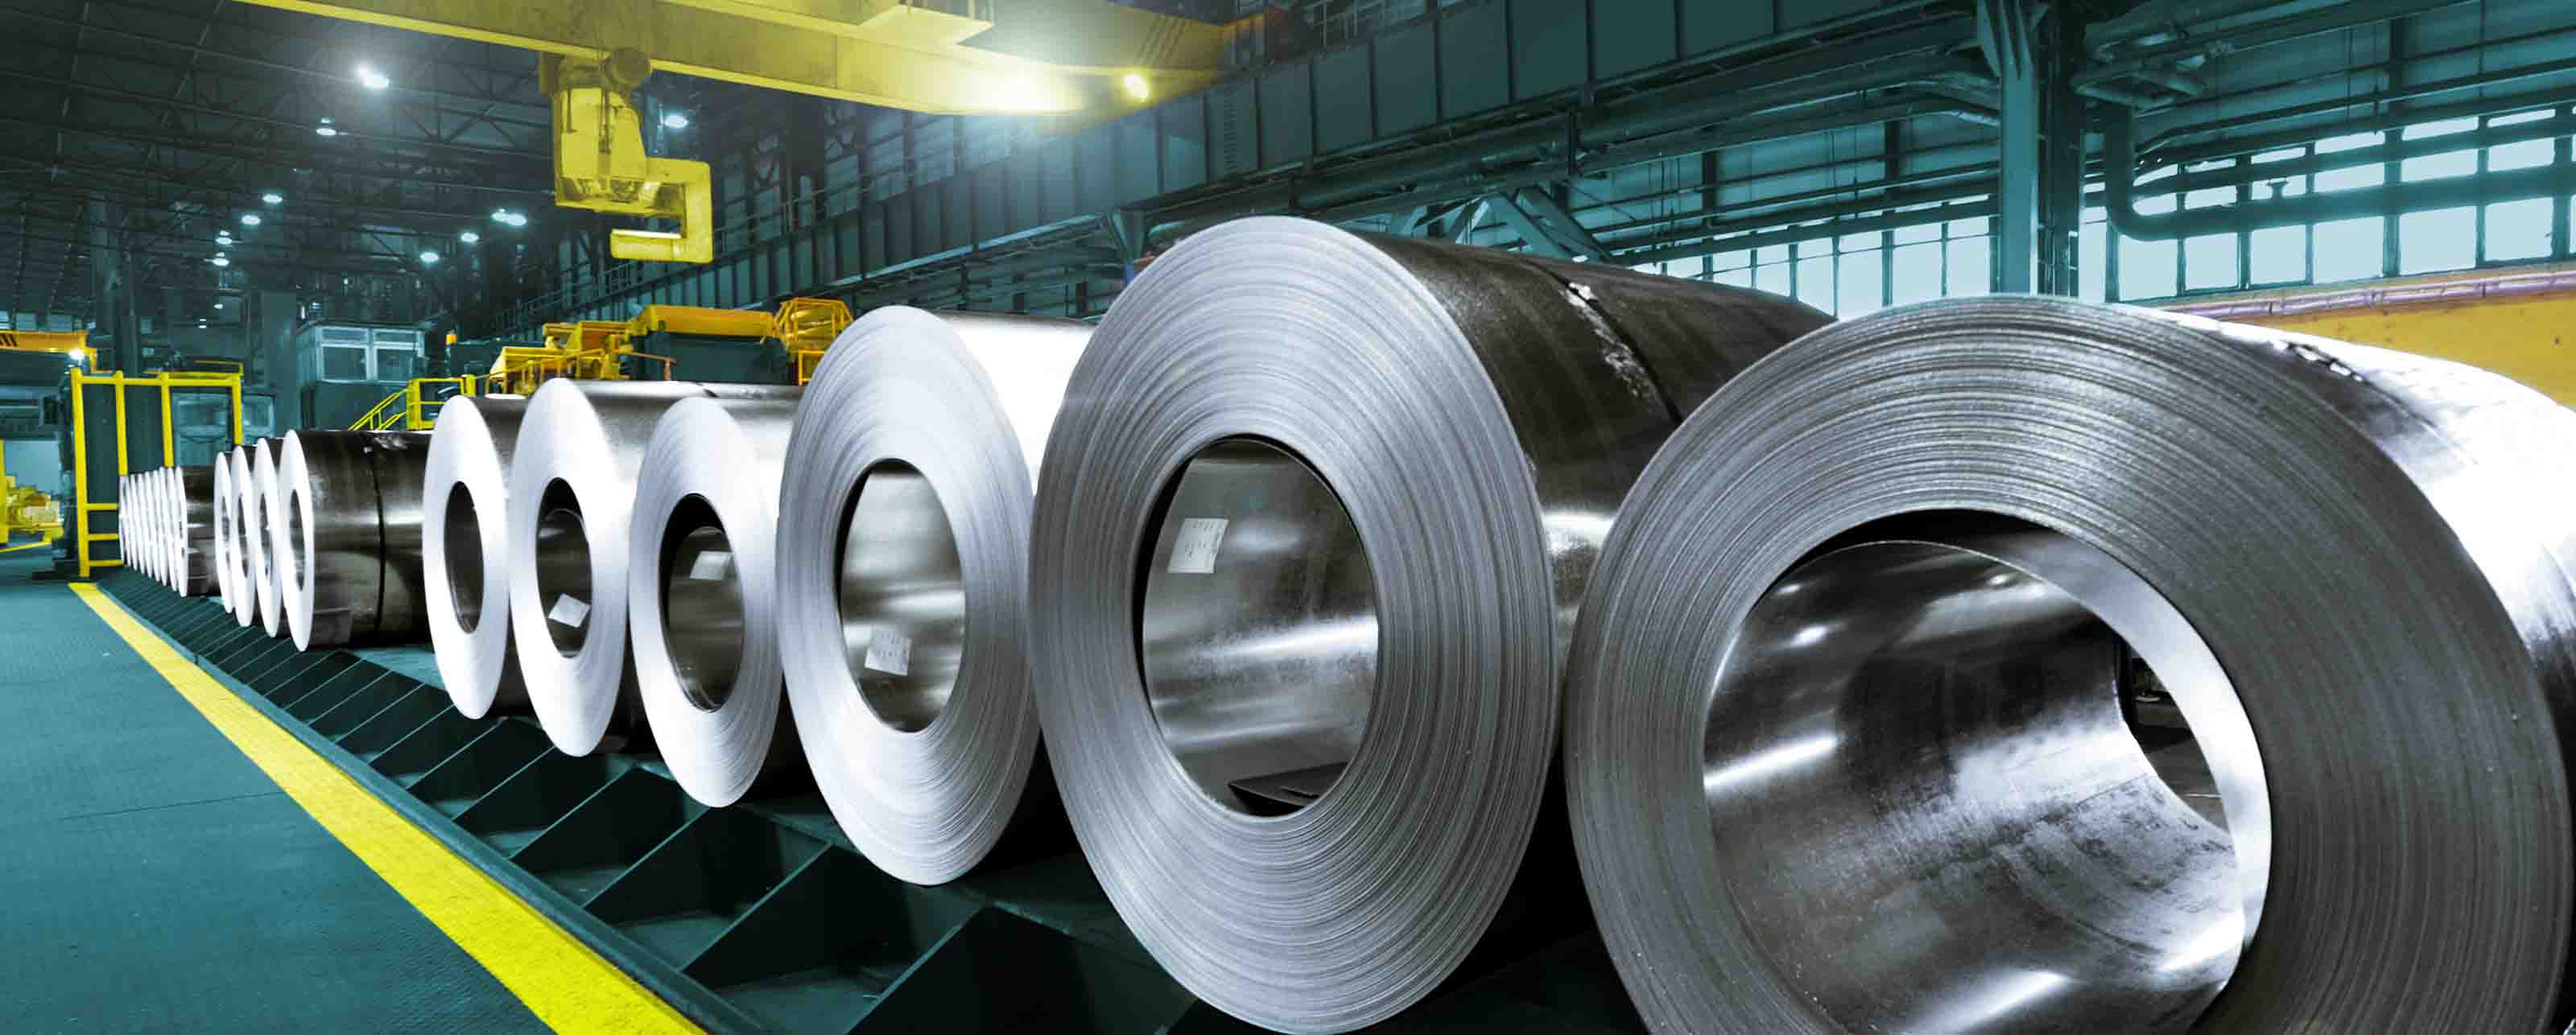 Around 40 MT new steel capacity to be commissioned in India by FY26: Assocham